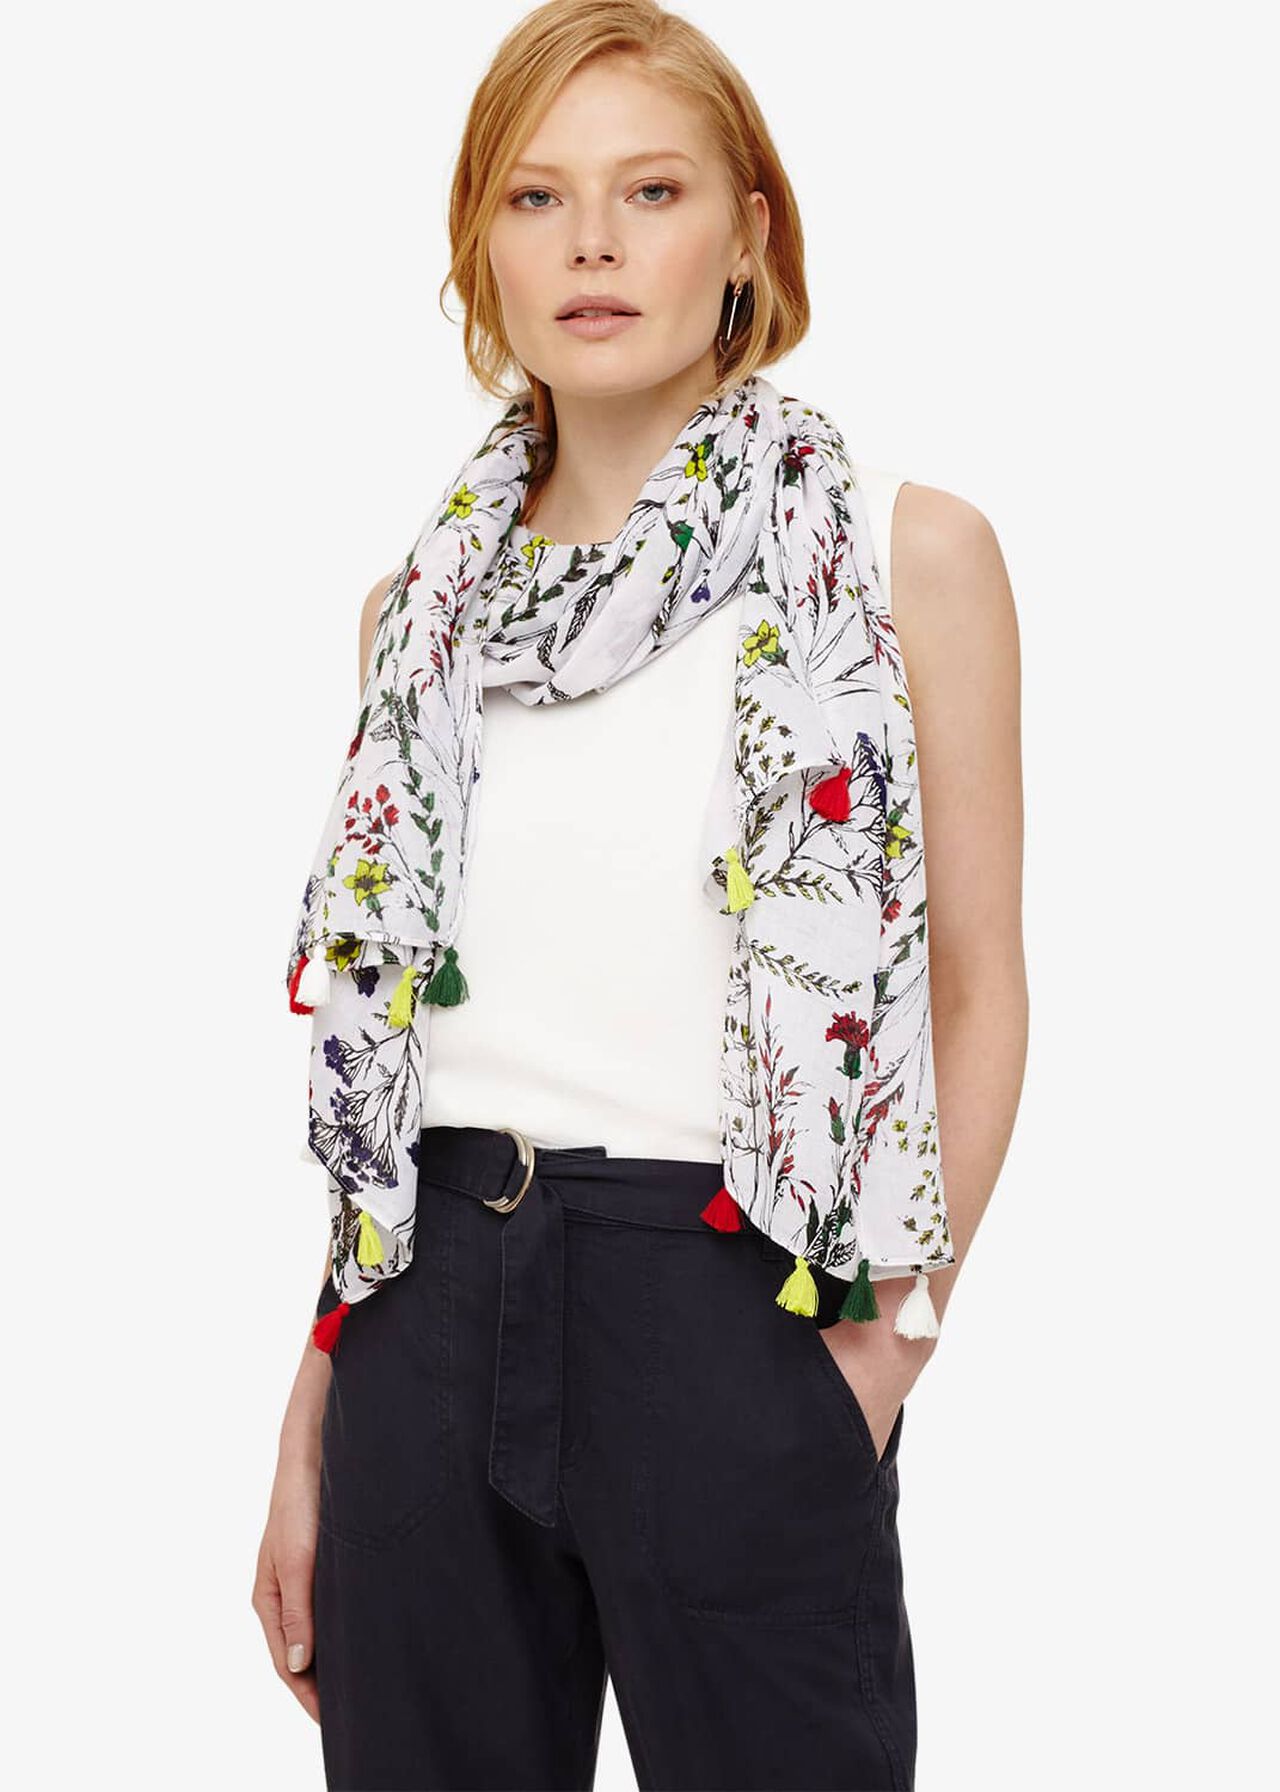 Chessie Bright Sketchy Floral Scarf